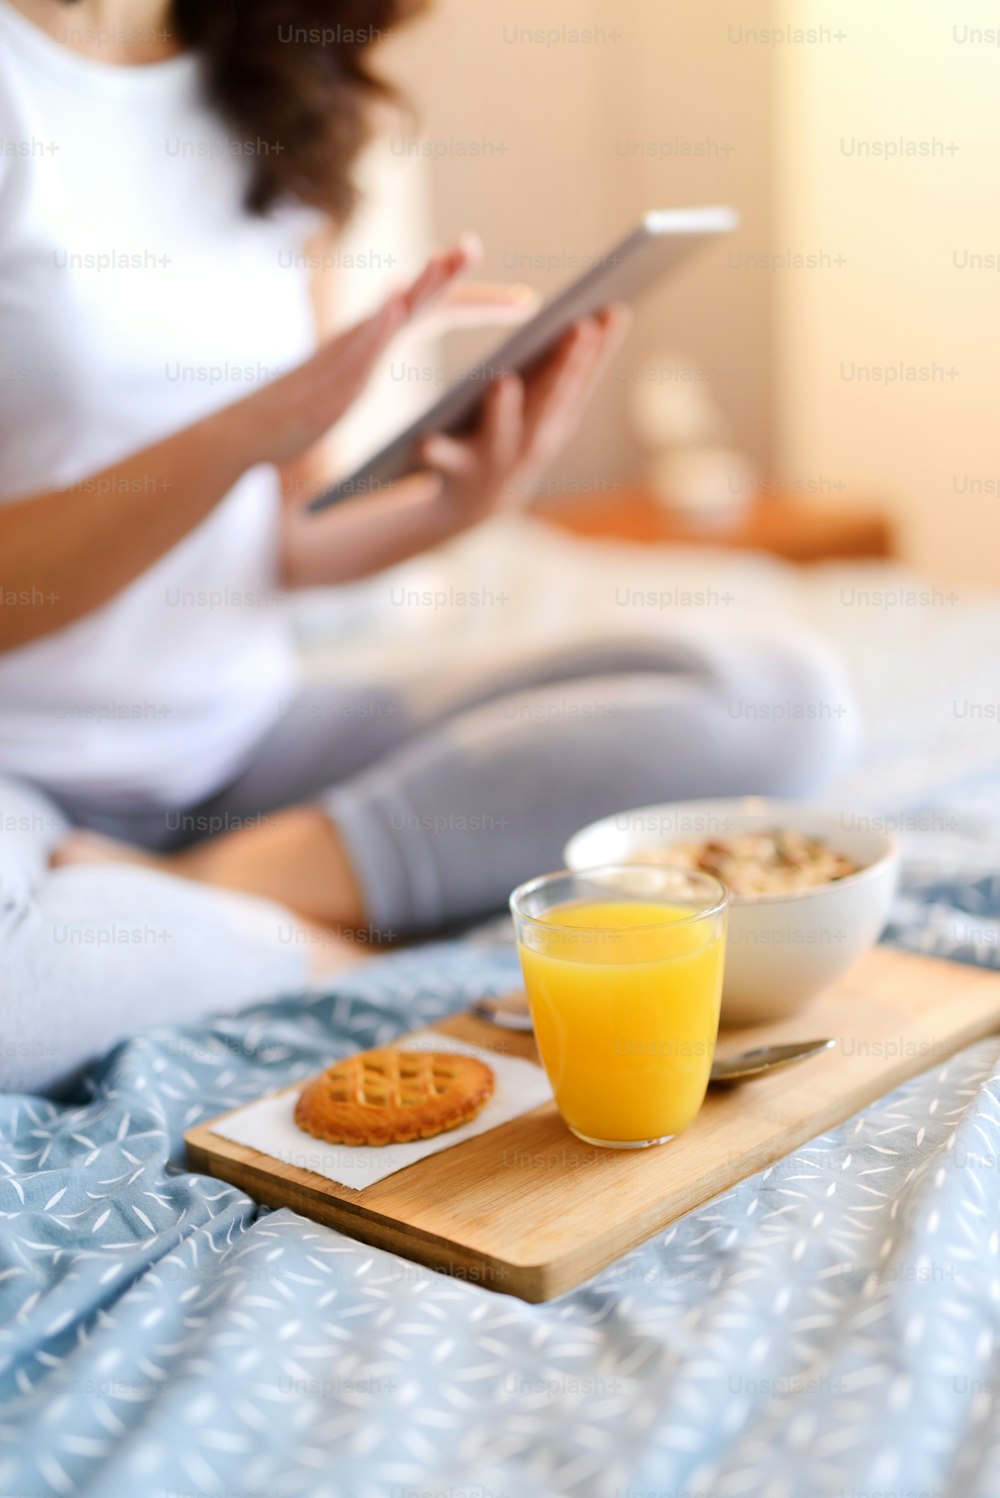 Healthy morning breakfast in a bed. Blurred figure of woman holding tablet.